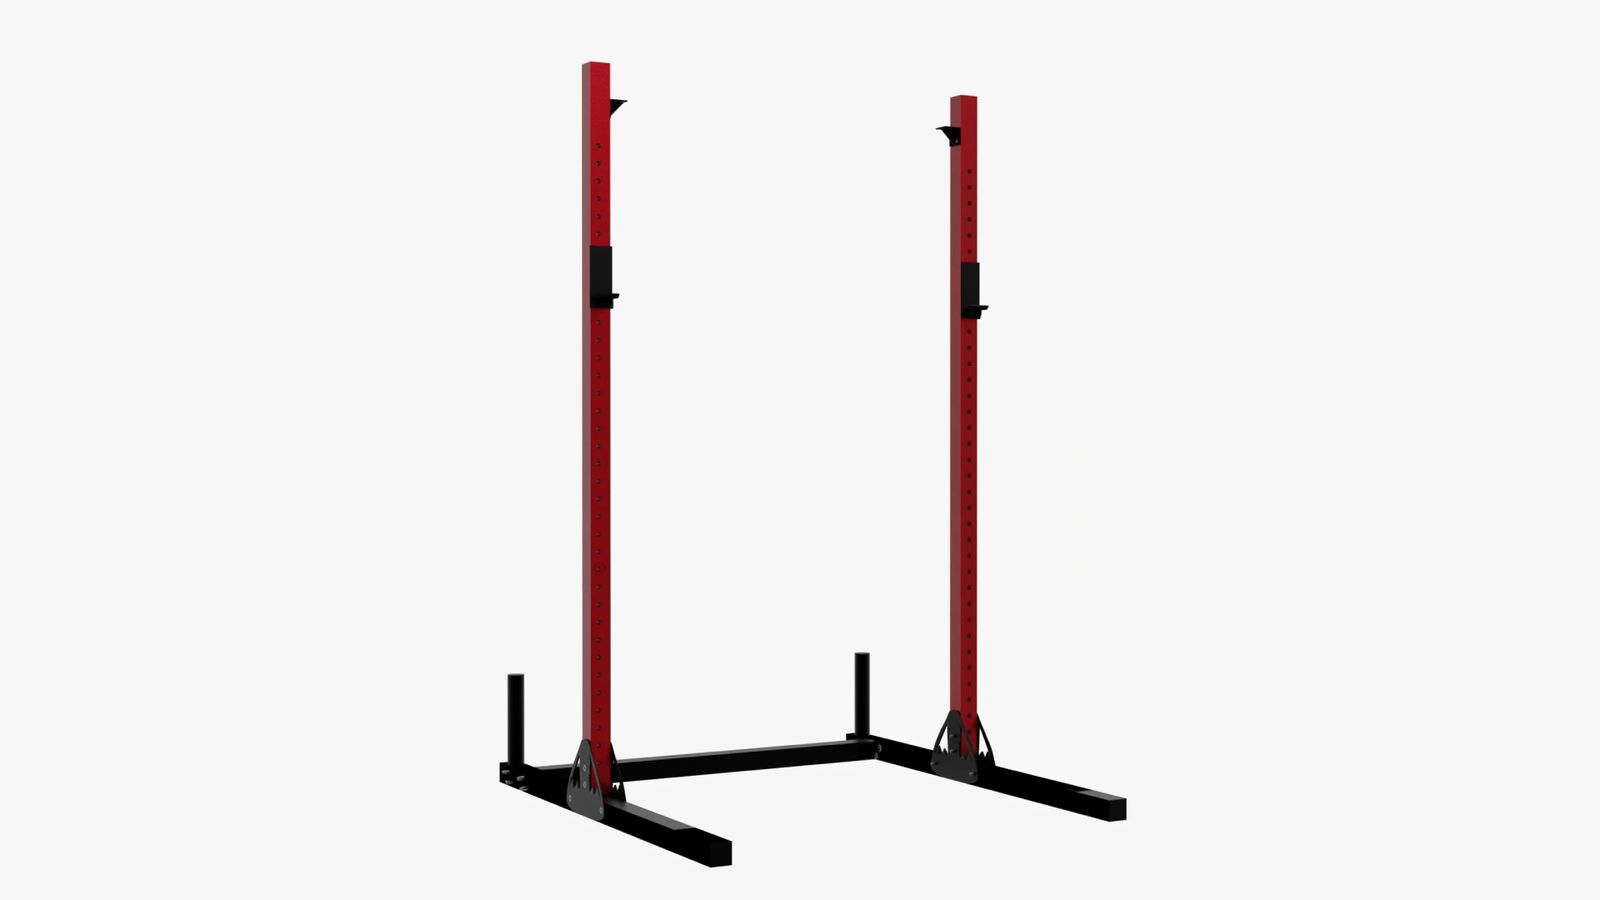 DMoose Squat Rack product image of a red squat rack with a black stand as the base.